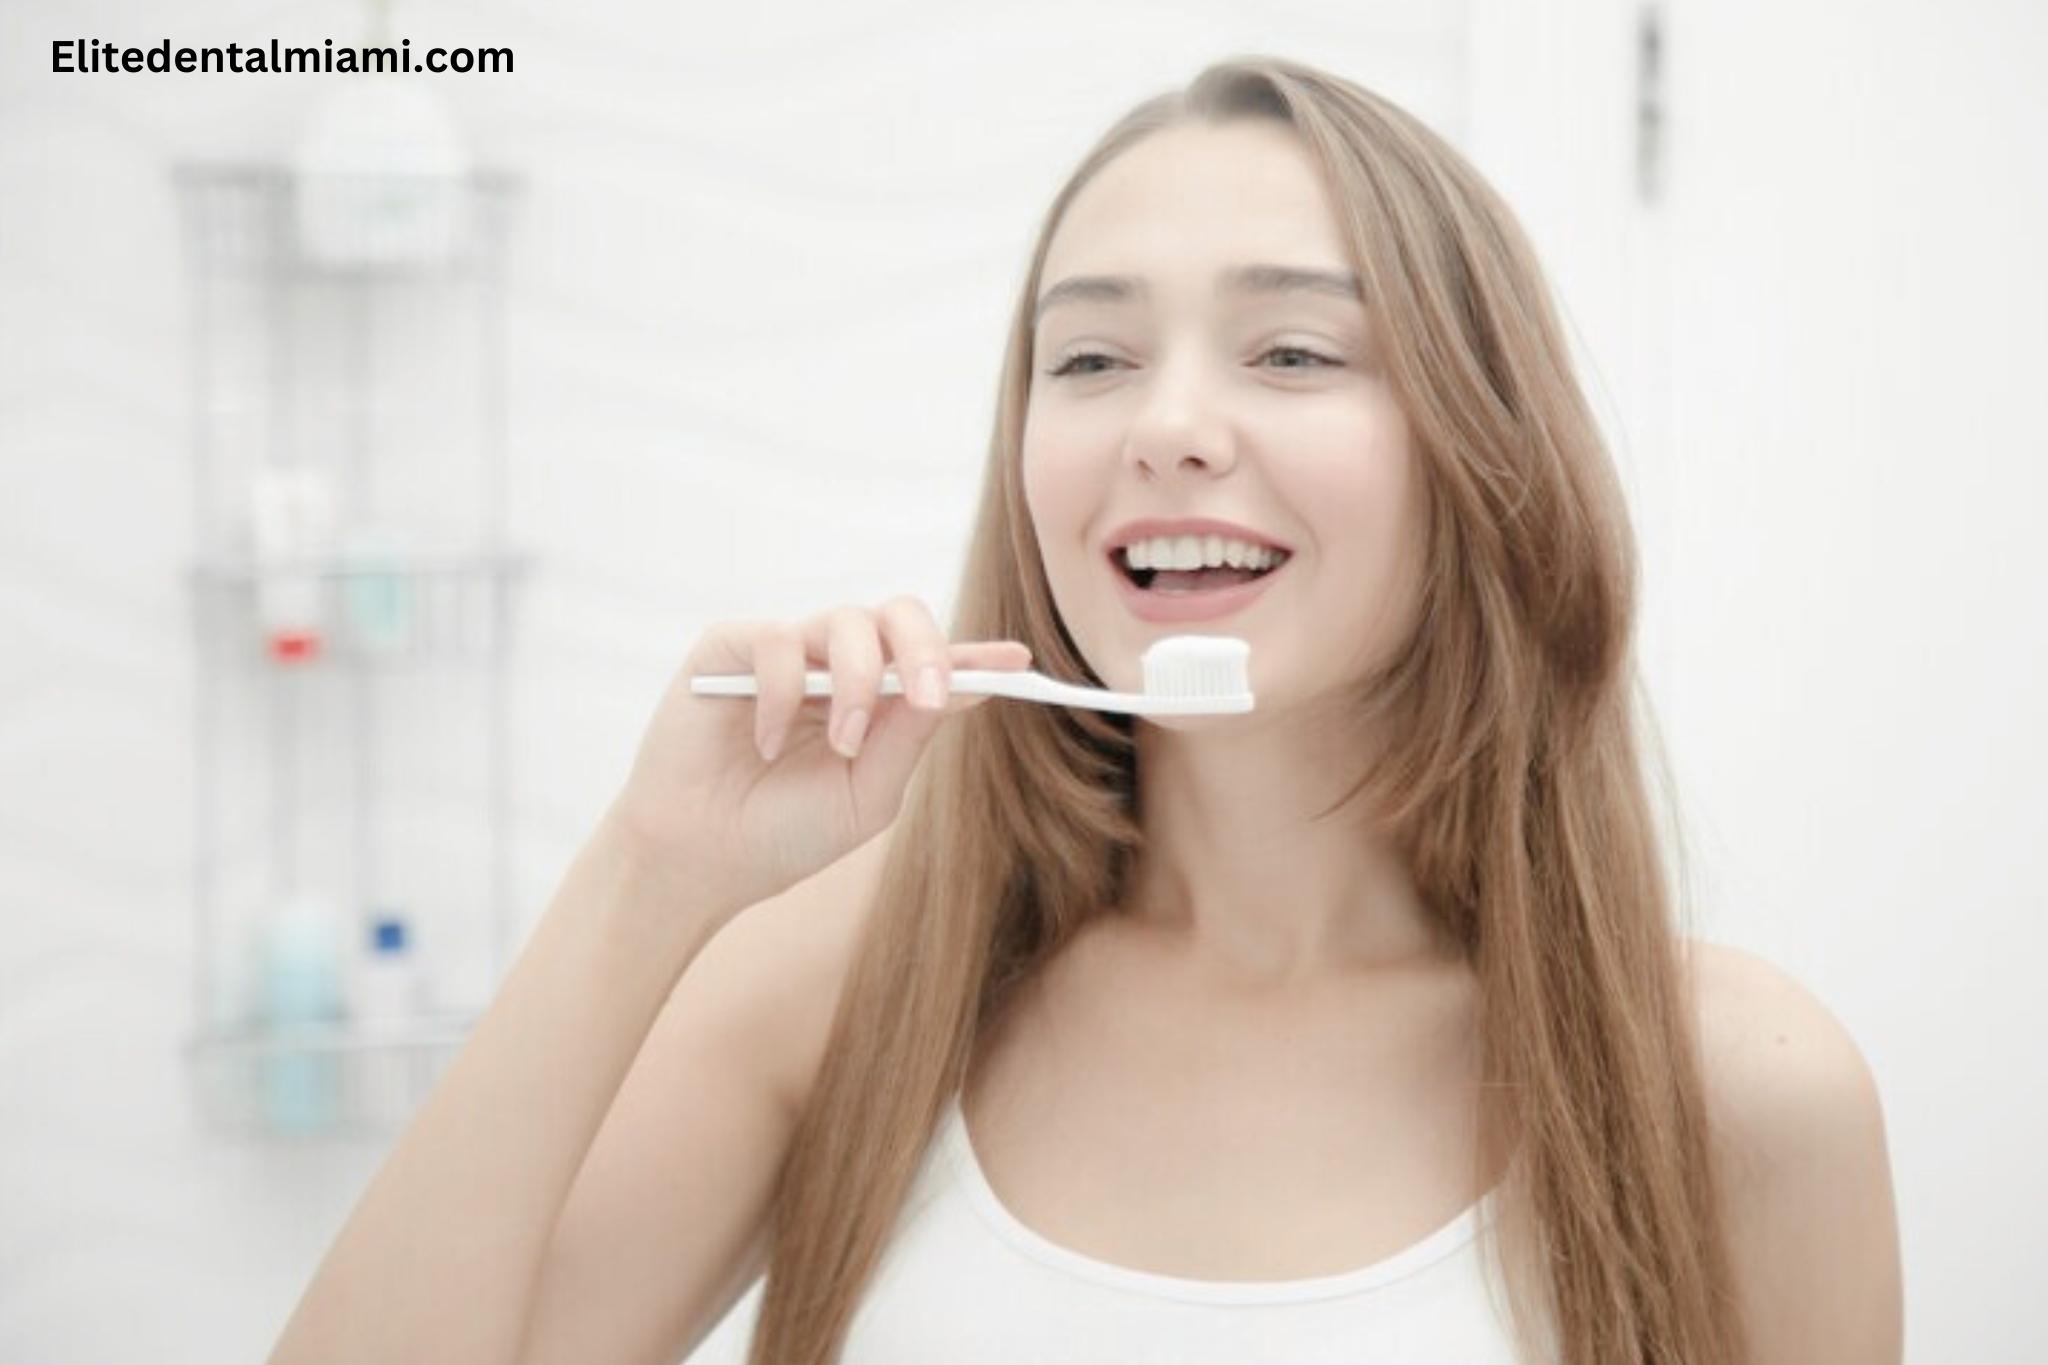 What Should I Brush My Teeth After Whitening Strips